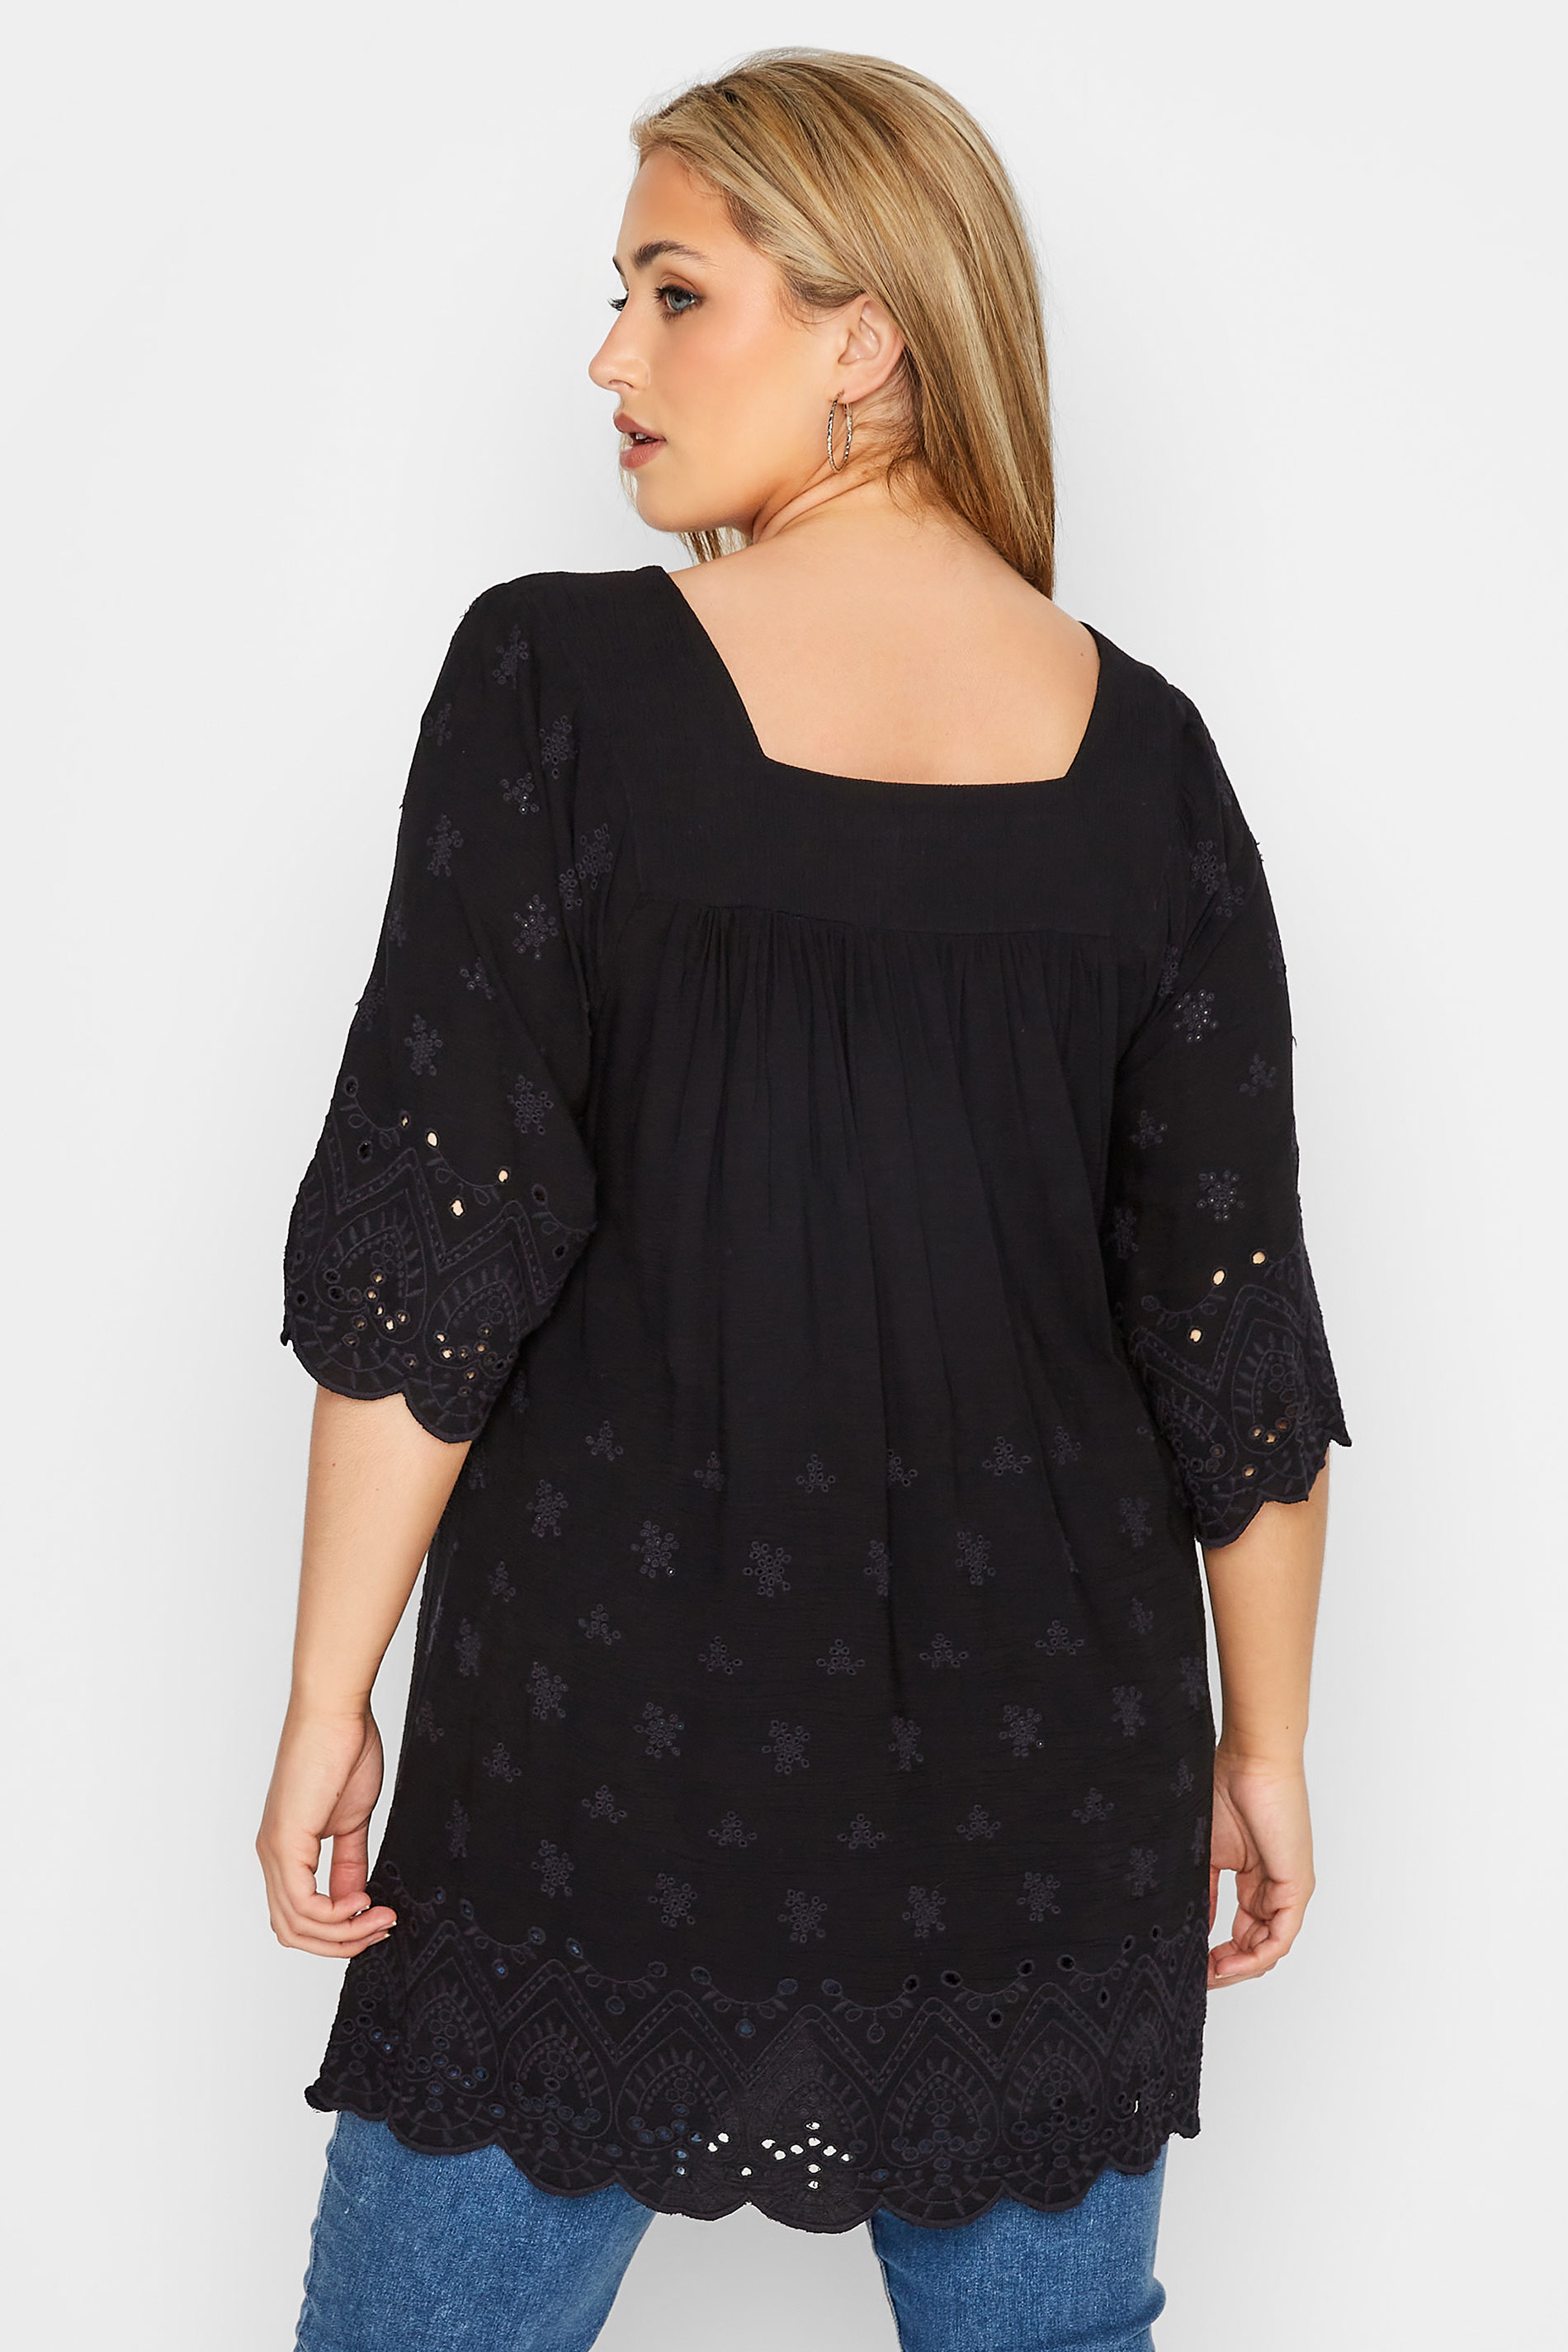 Grande taille  Tops Grande taille  Tops Casual | Top Noir Ample Broderie Anglaise Volanté - XQ19631